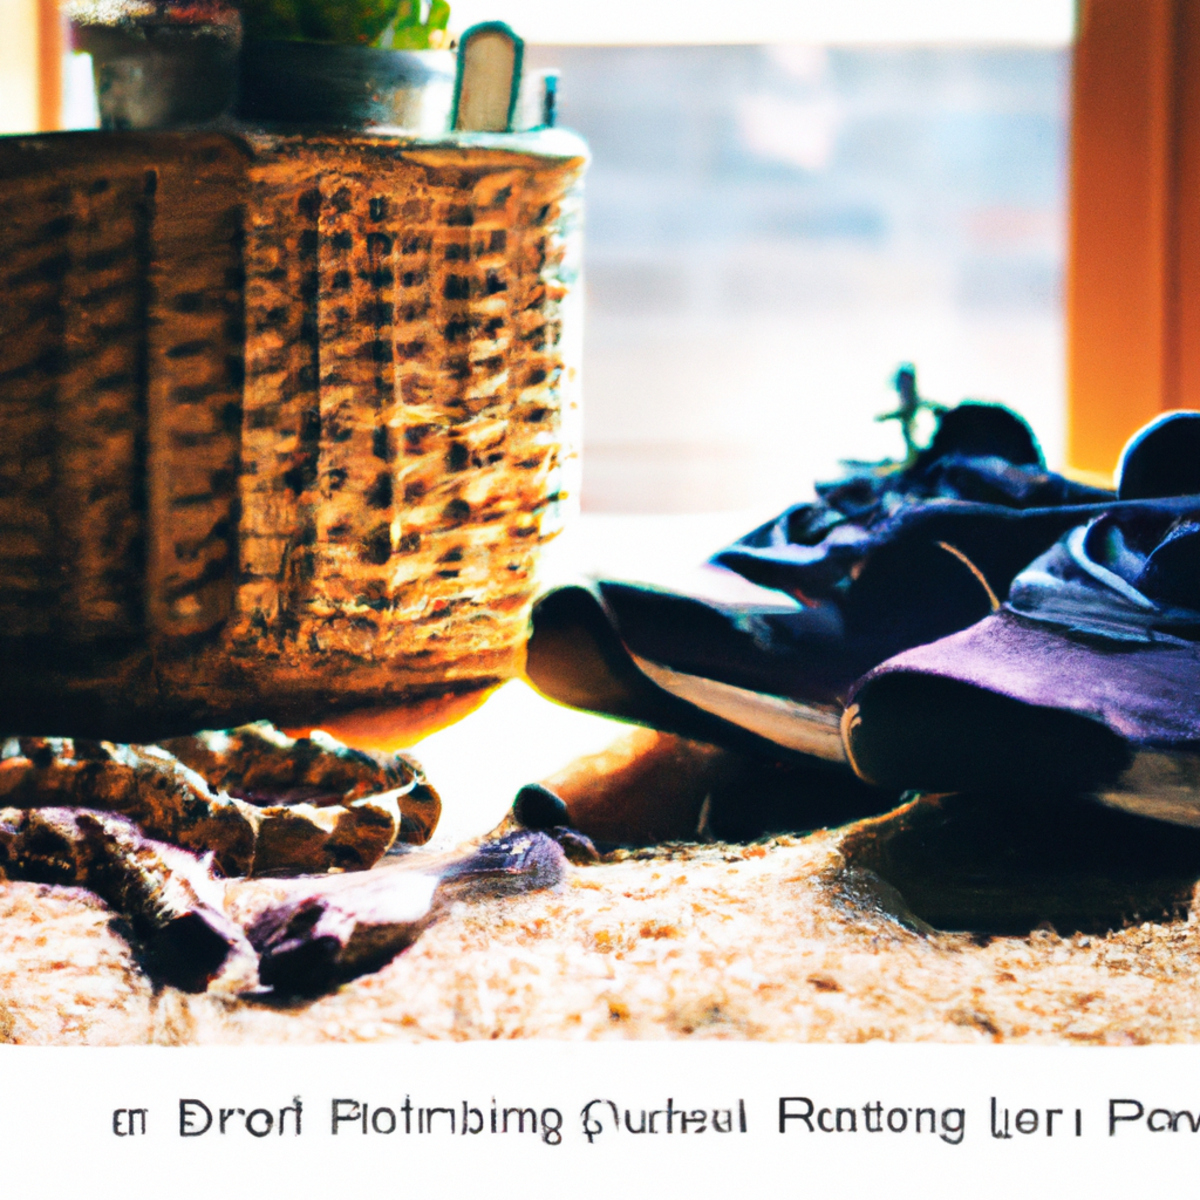 Resilience and hope in living with Pulmonary Alveolar Proteinosis (PAP): worn-out shoes, books, vibrant flowers, and warm sunlight symbolize strength and perseverance.